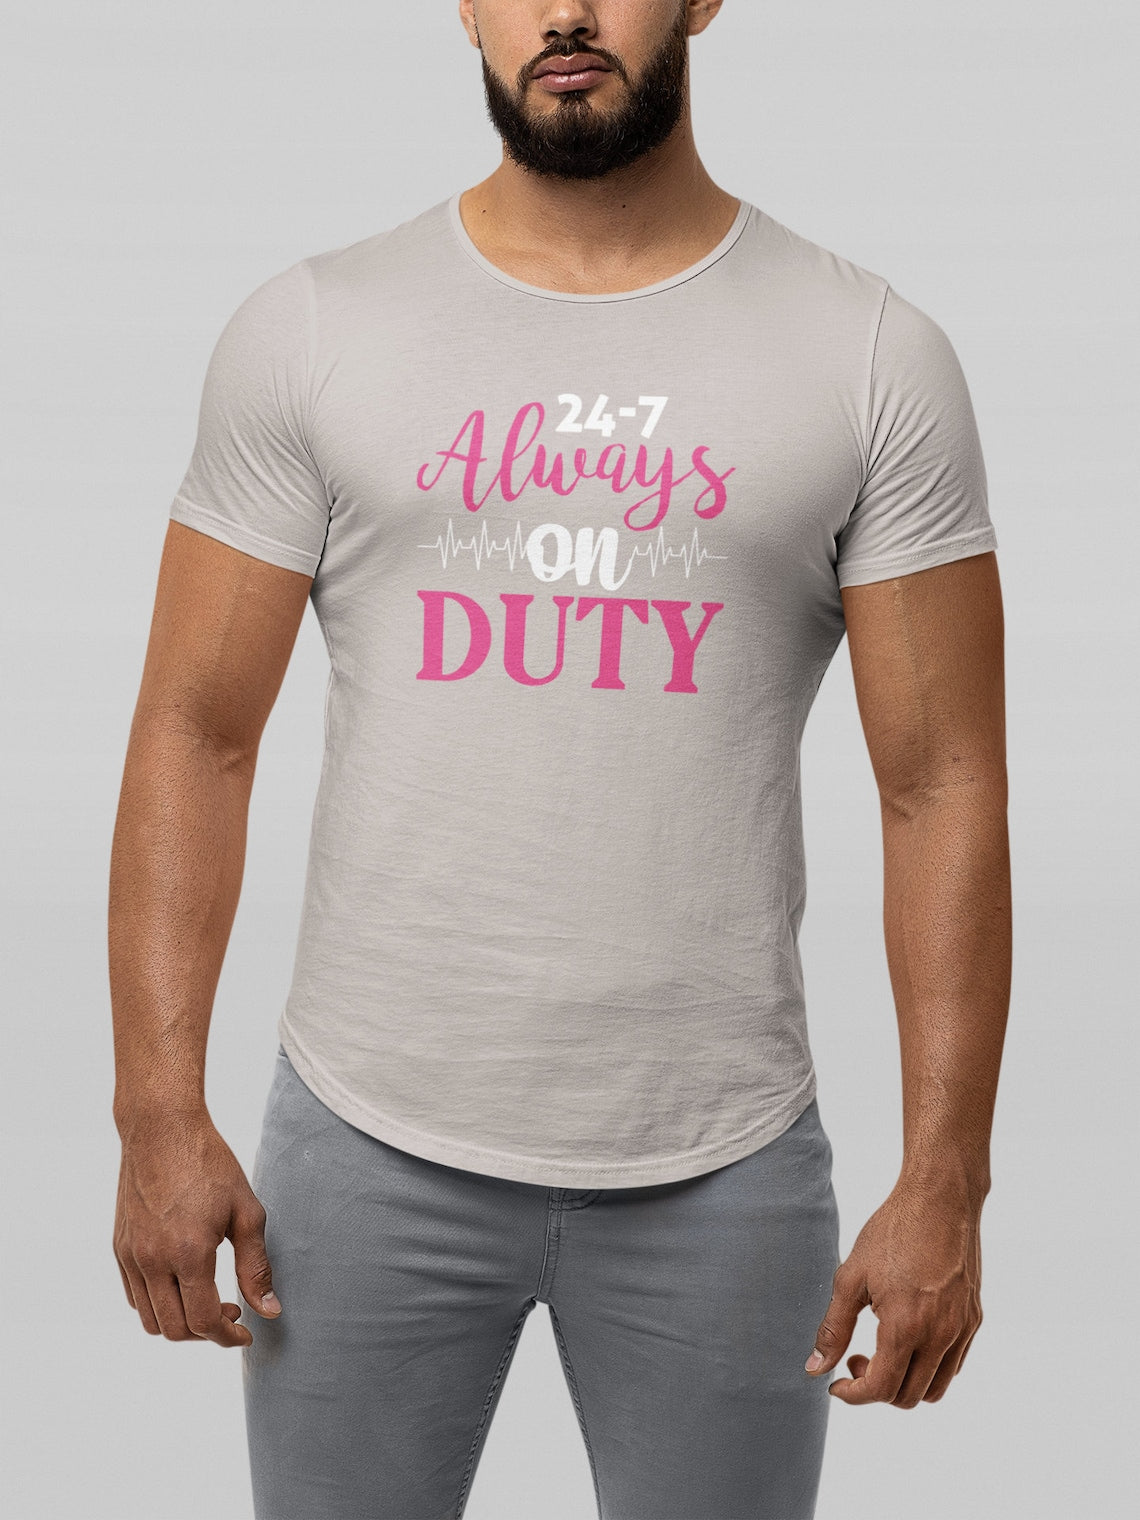 24-7 Always On Duty Men's Jersey Curved Hem Tee, Doctor shirts, Doctor gift ideas, New Doctor shirt, doctors gift, Doctor team shirt